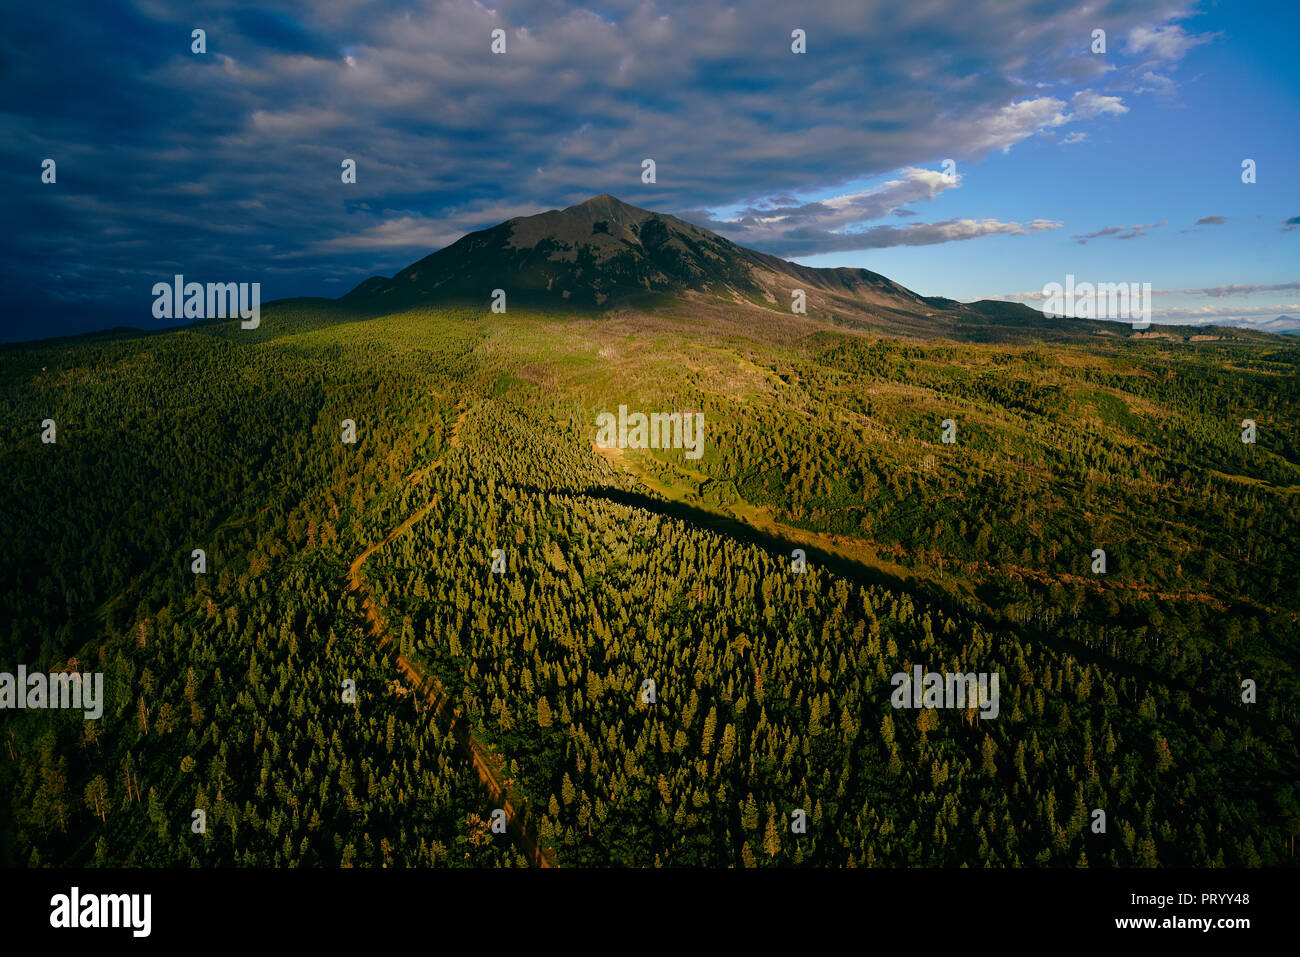 USA, Early morning aerial photograph of Spanish Peaks National Natural Landmark in Southern Colorado Stock Photo